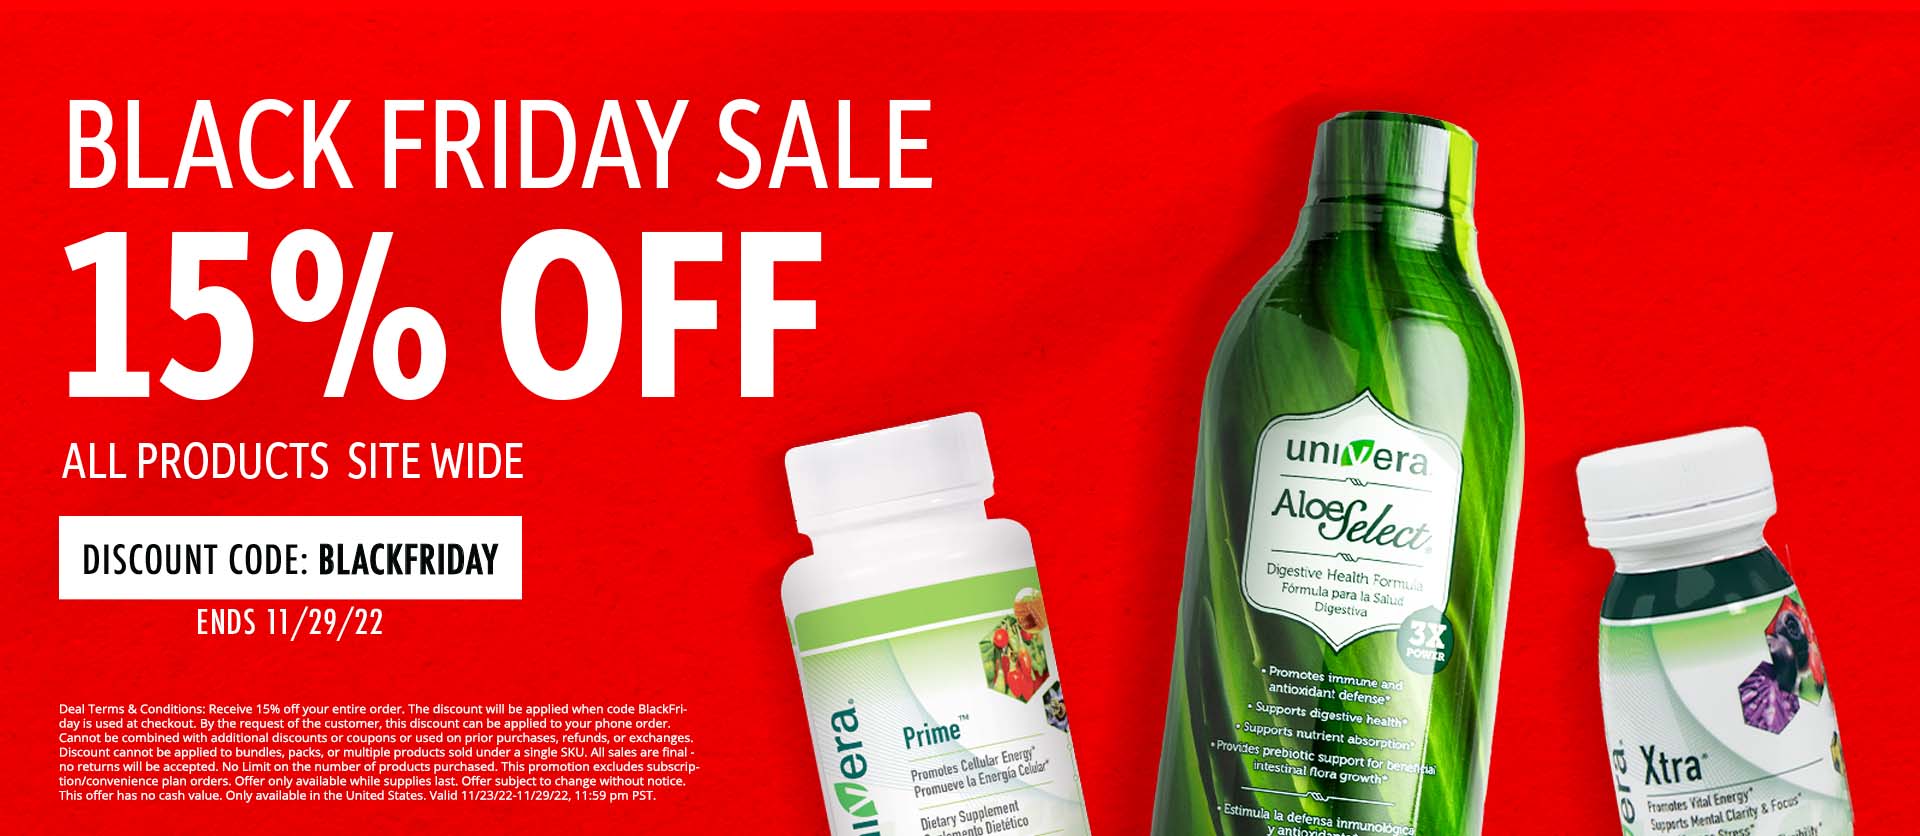 15% off all products sitewide for Univera Black Friday Sale!